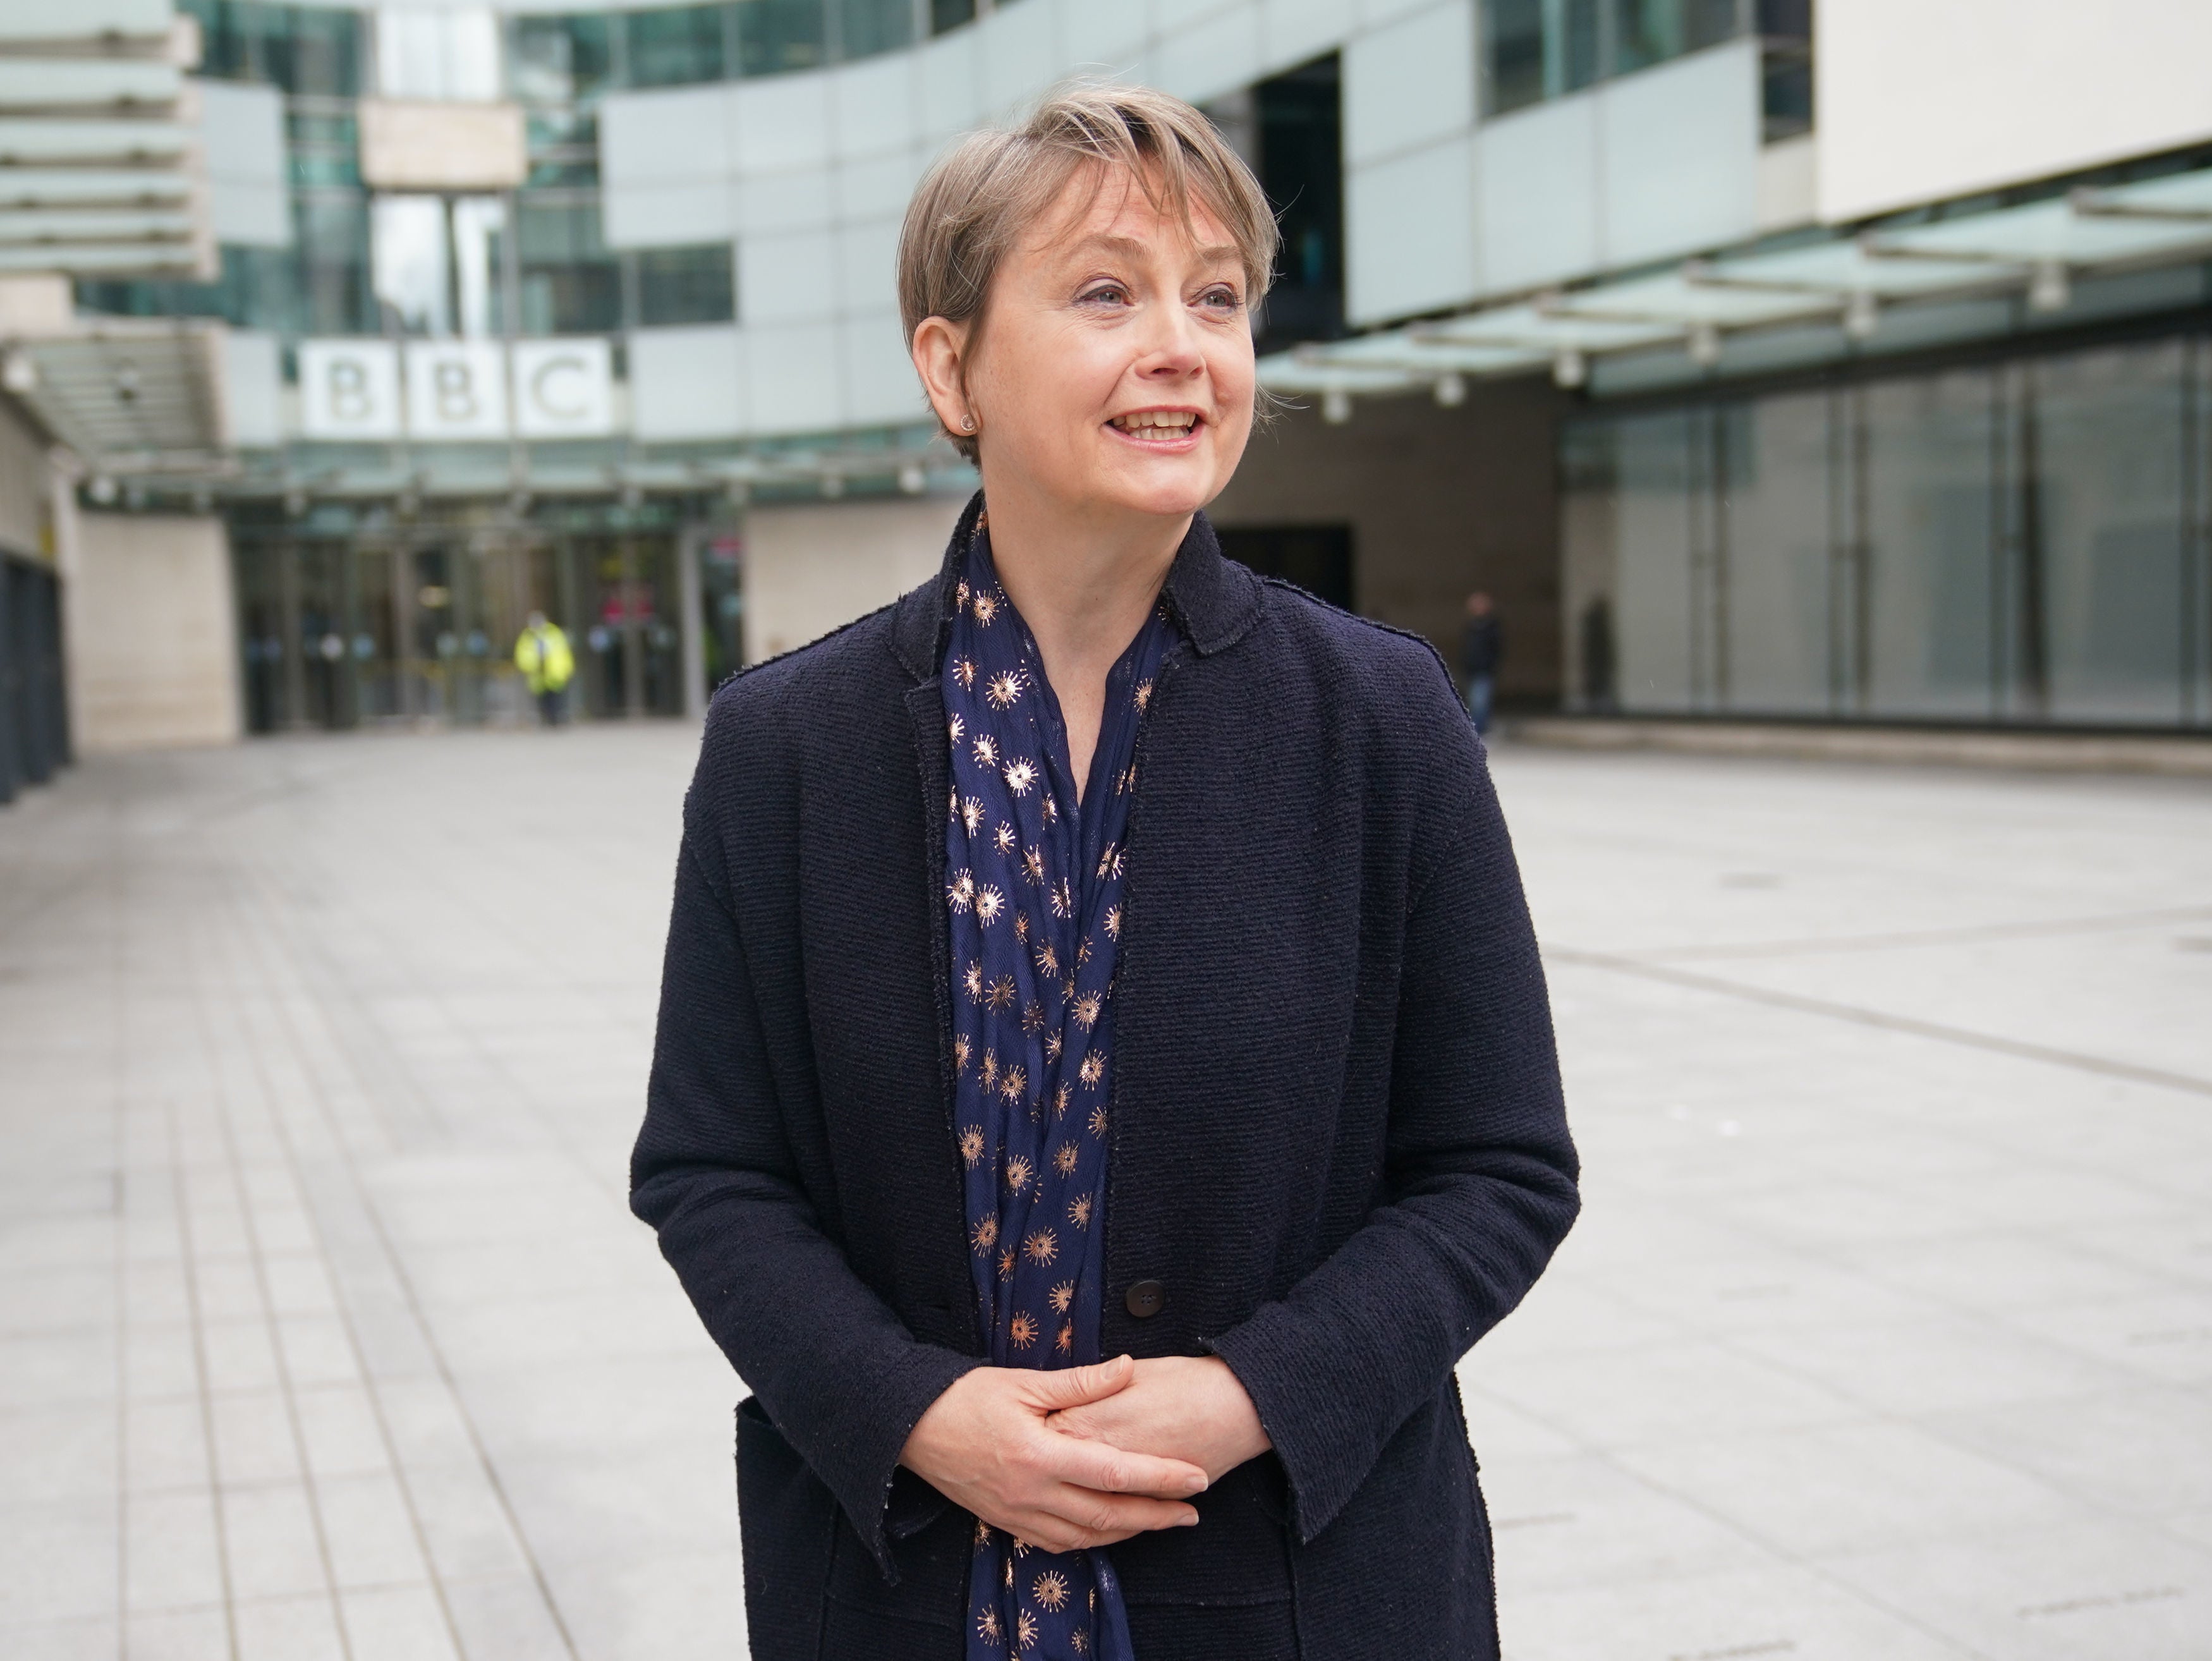 Yvette Cooper says government must address ‘this injustice’ if it is actually ‘serious’ about trying to solve violence against women and girls